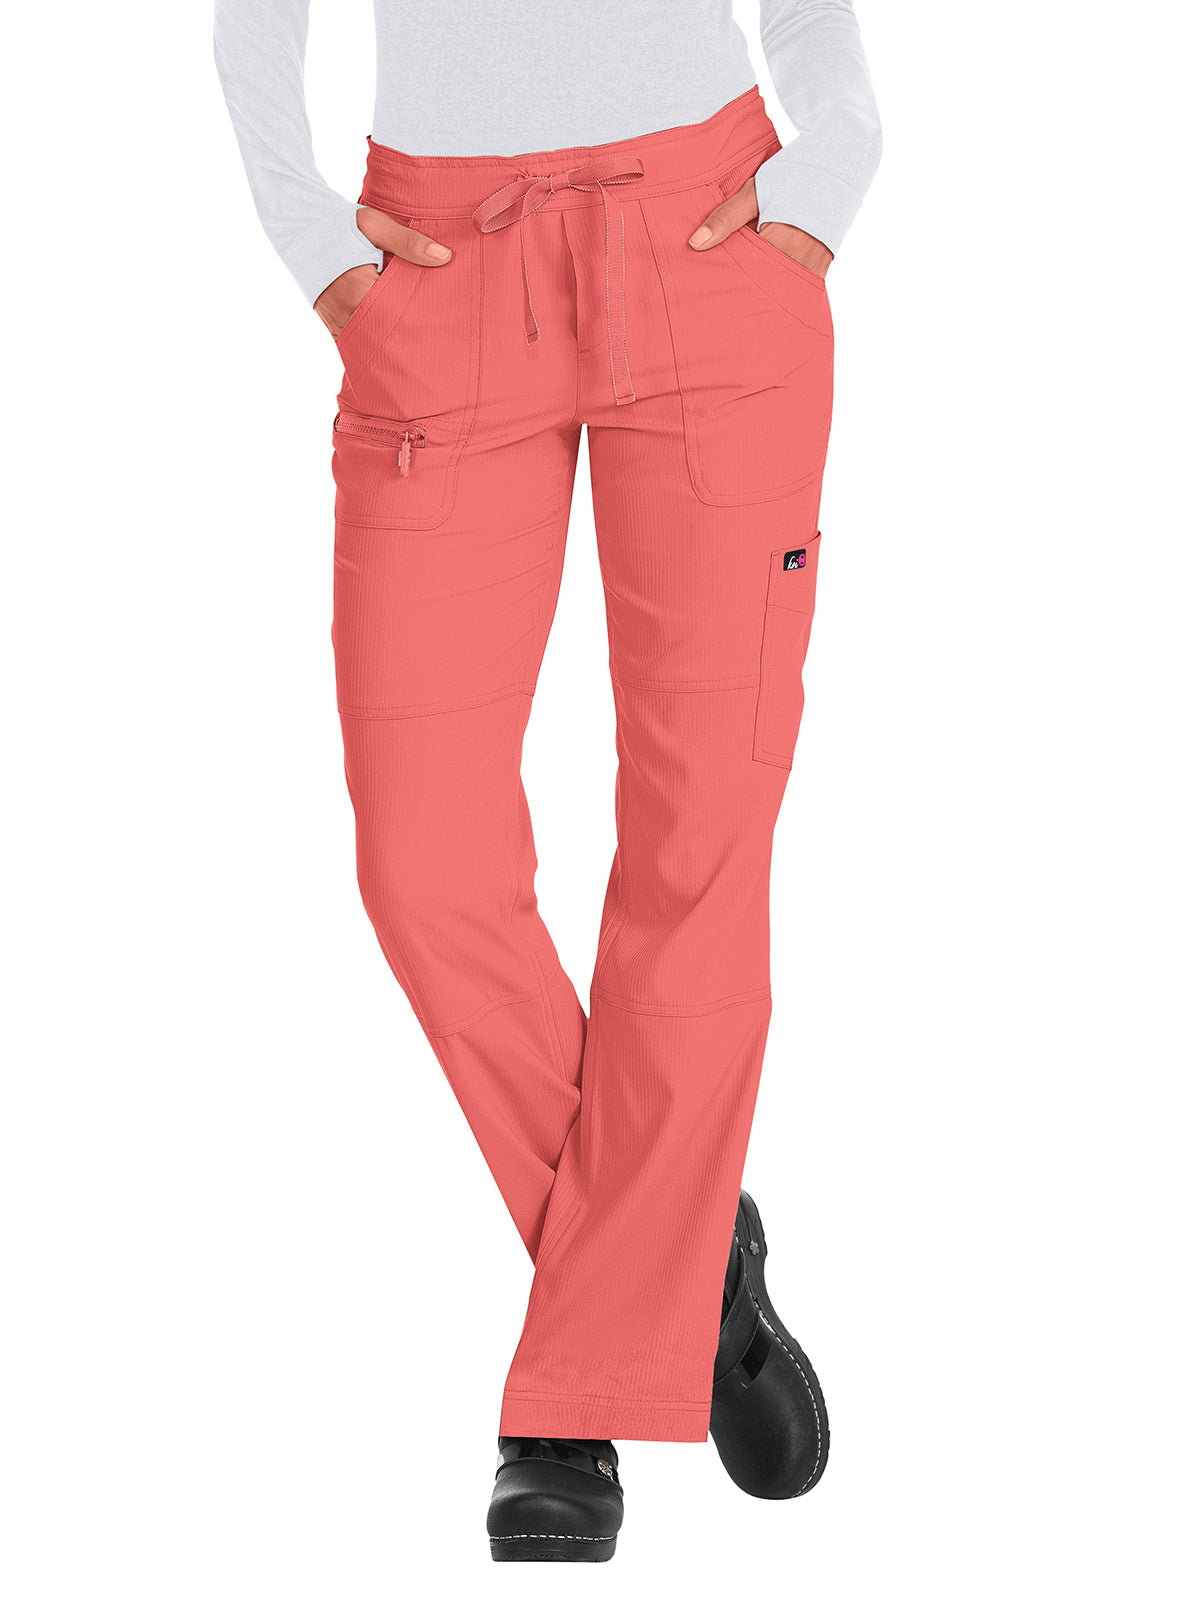 Women's Lightweight Pant - 721 - Coral